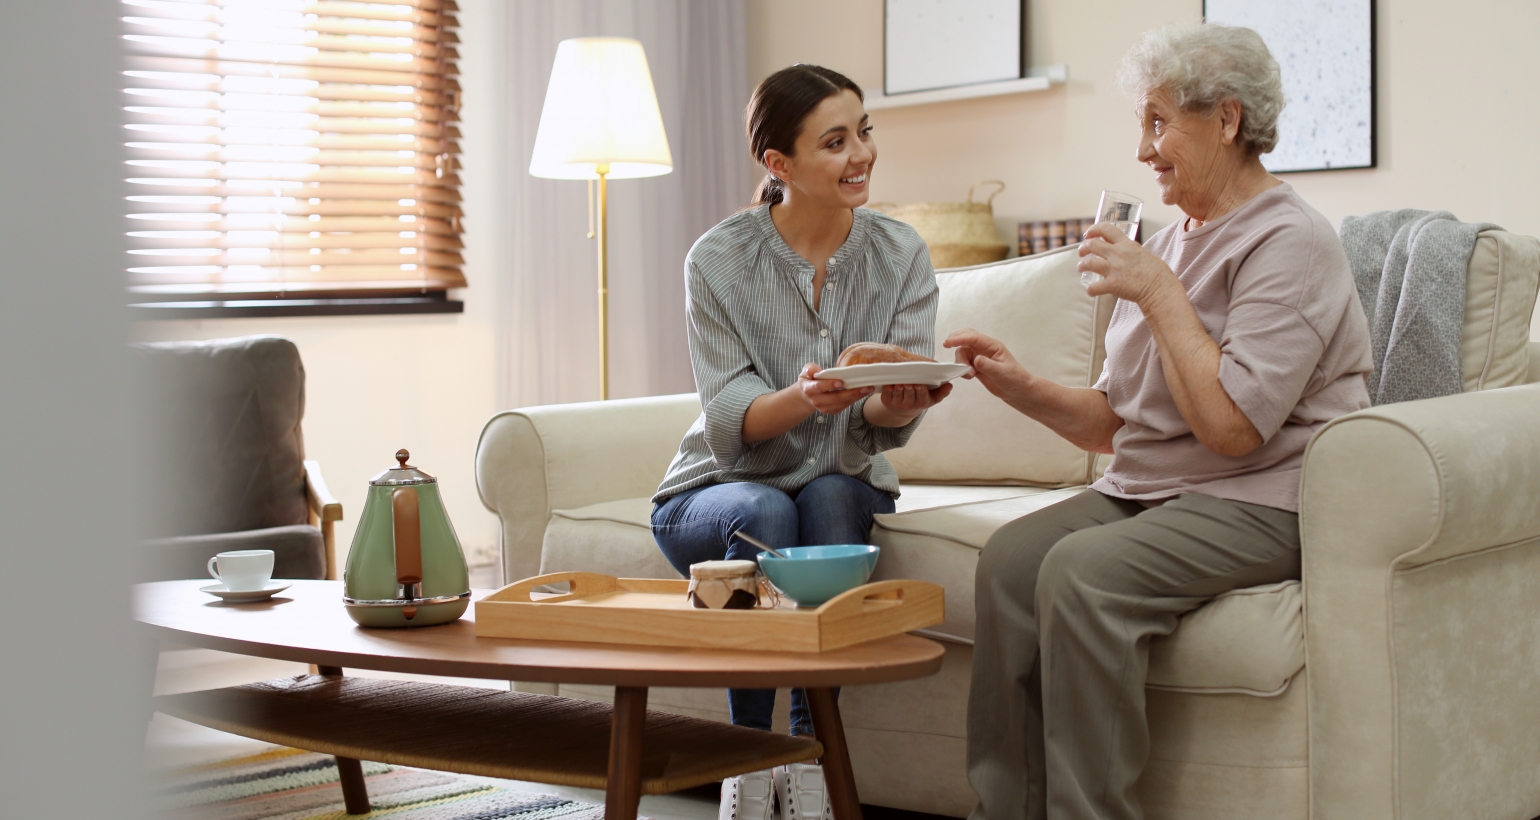 Young woman serving dinner for elderly woman in living room